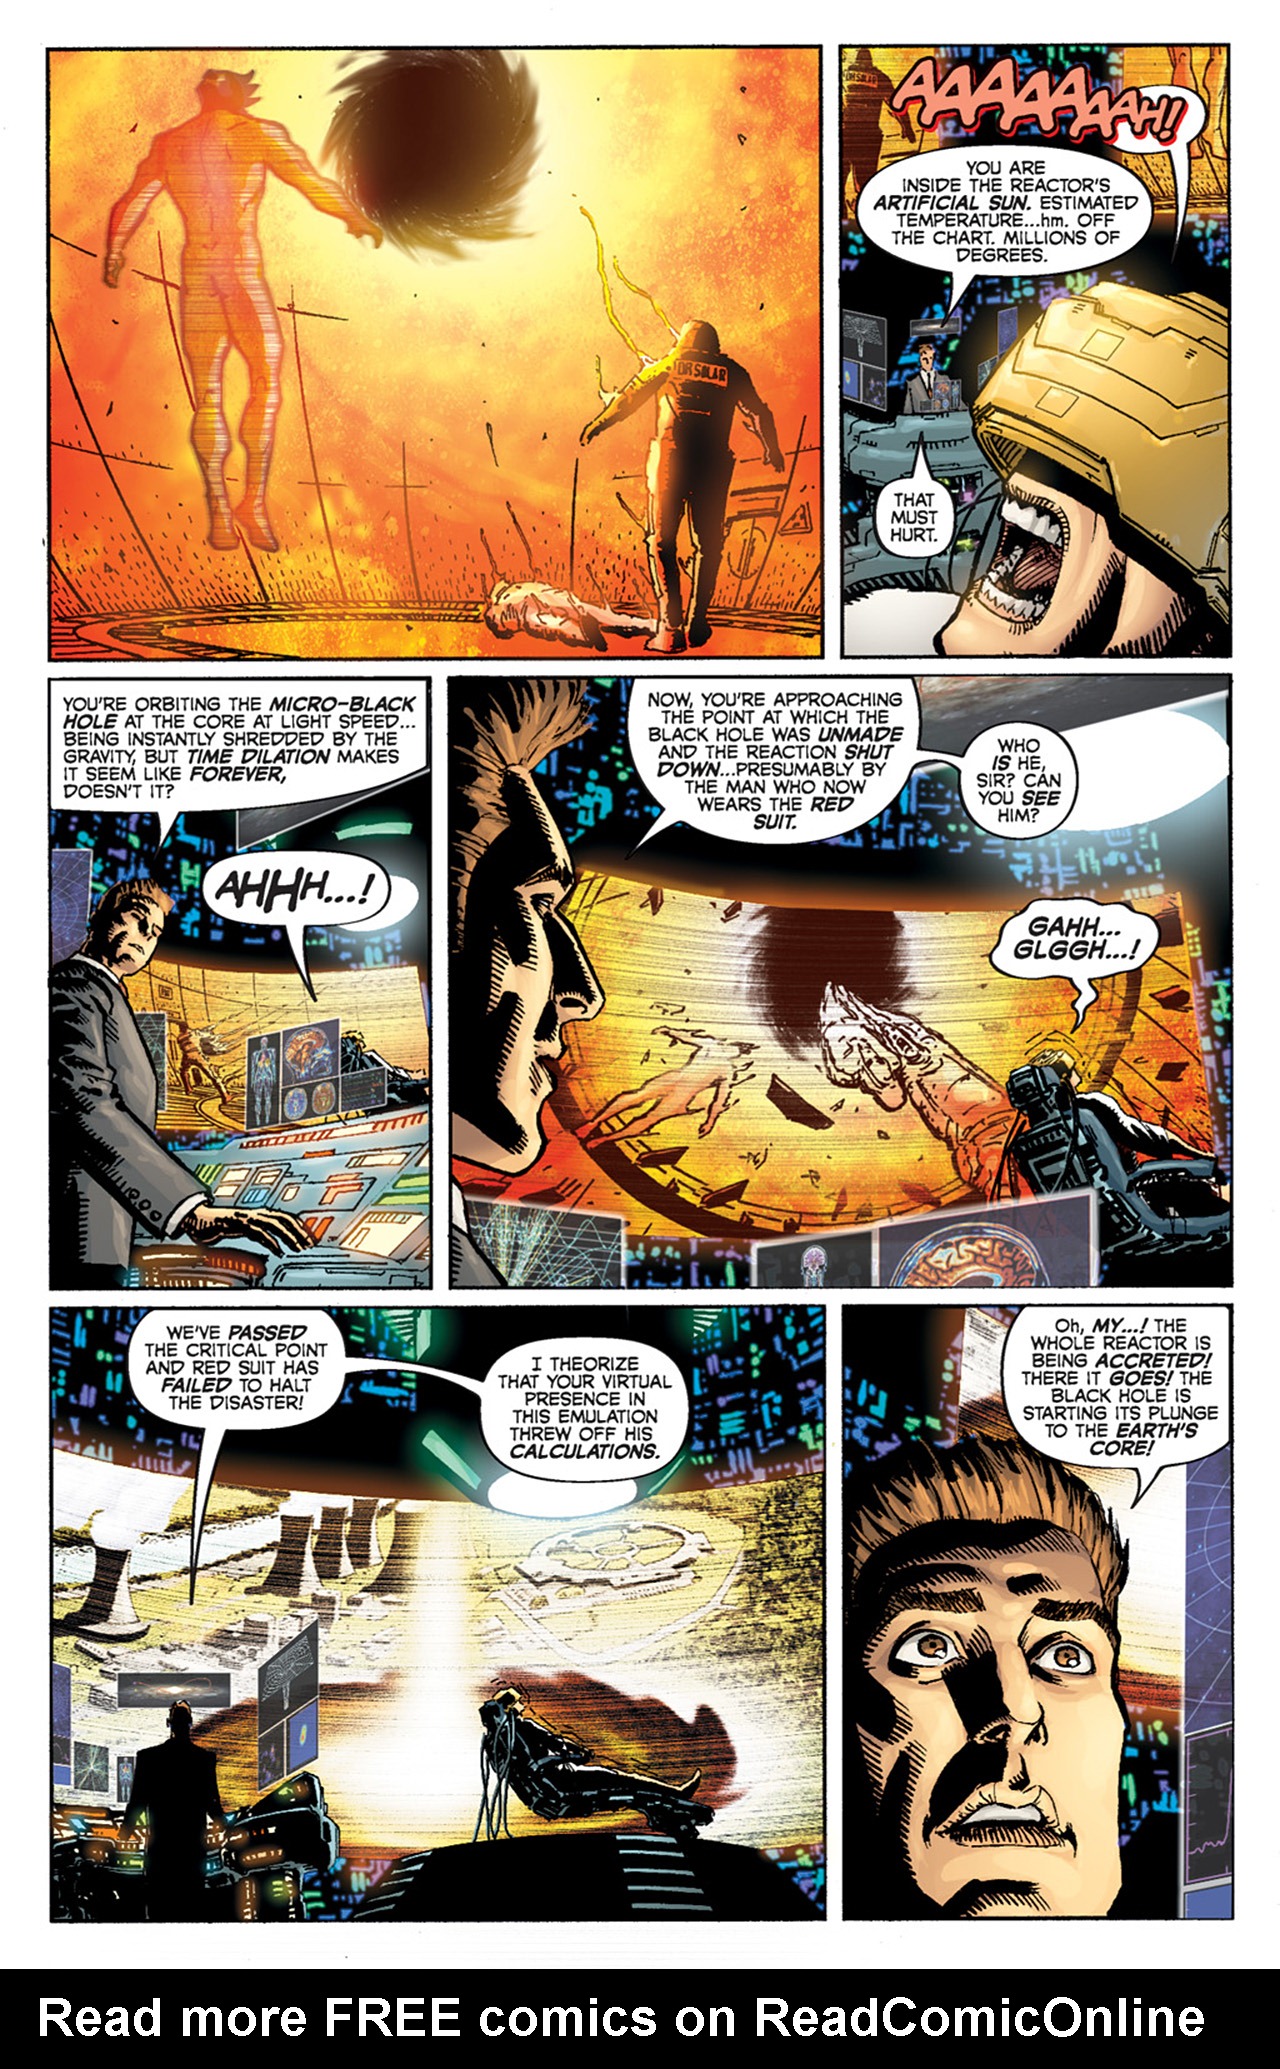 Doctor Solar, Man of the Atom (2010) Issue #5 #6 - English 8